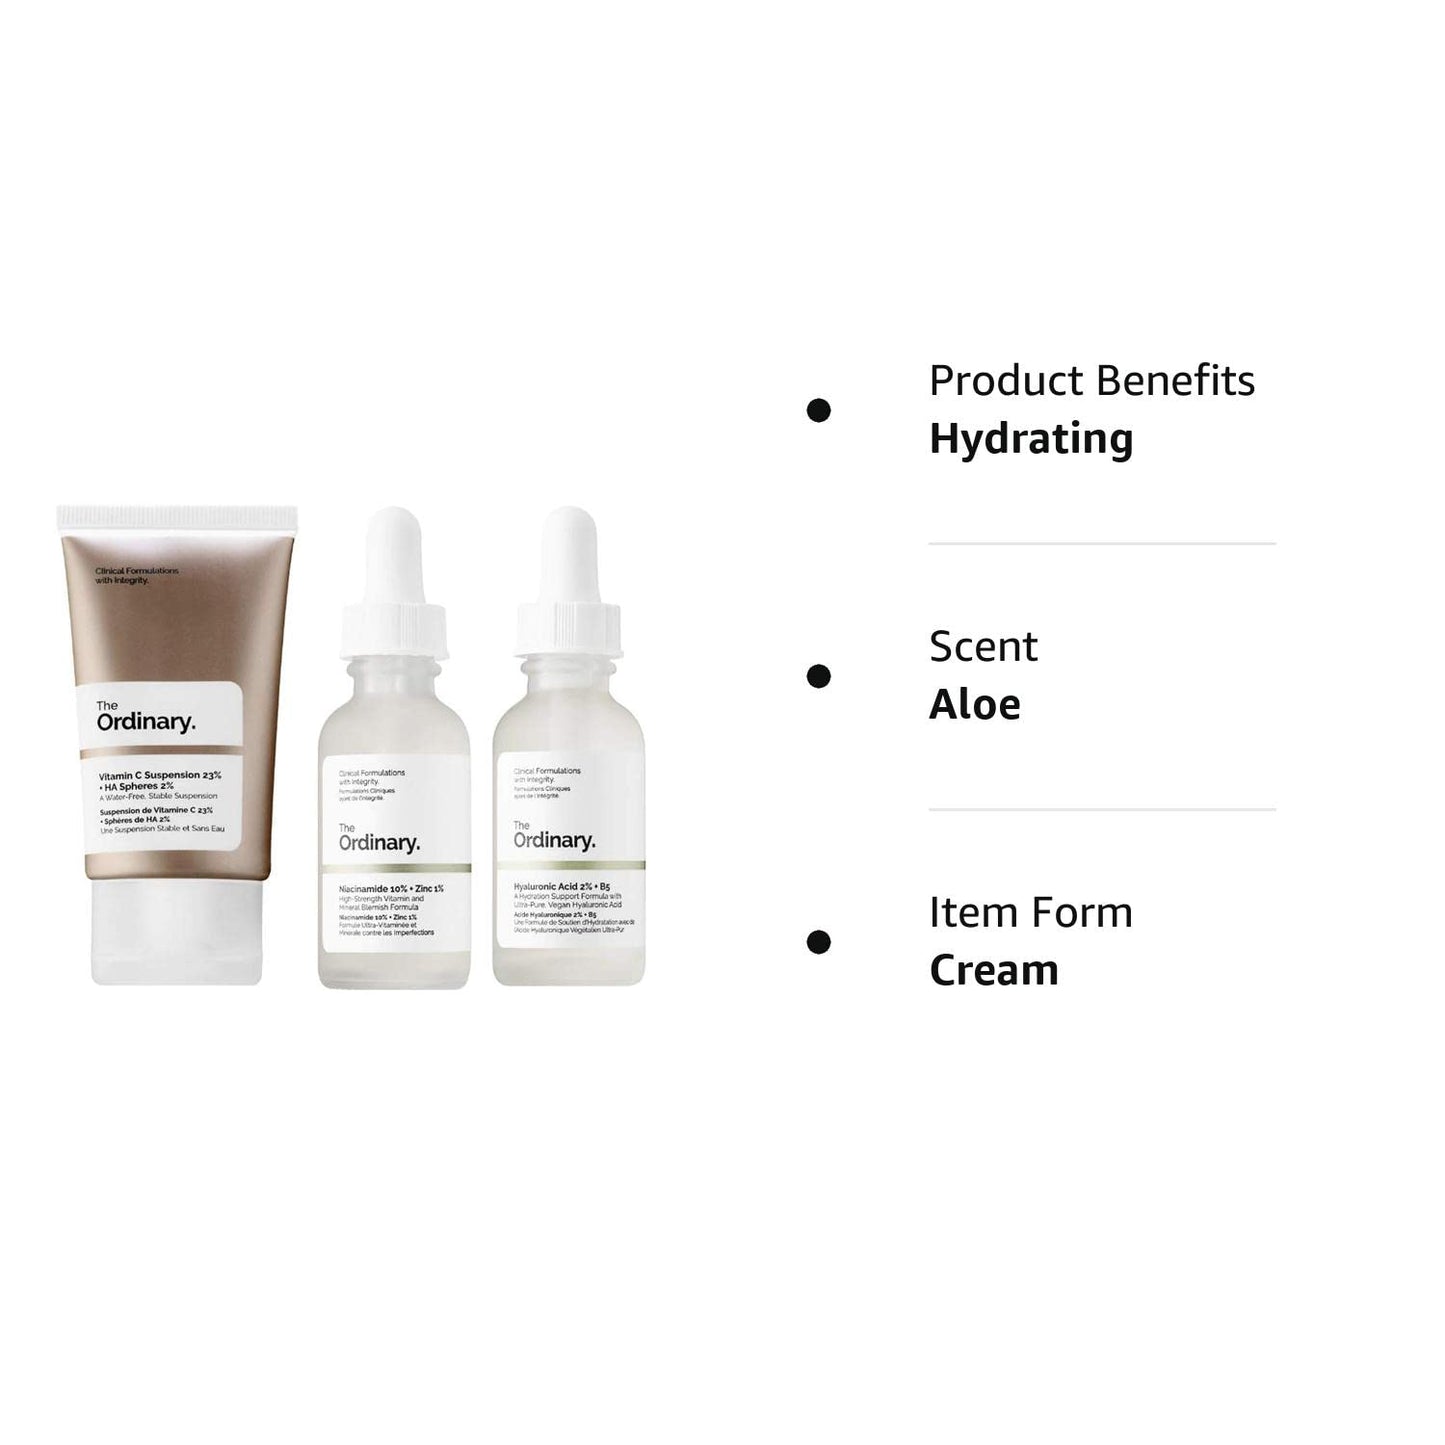 The Ordinary Facial Treatment Set: Vitamin C Cream, Hyaluronic Acid Serum, and Niacinamide Serum for Brightening, Hydration, and Blemish Reduction! Vegan, Paraben-Free, and Cruelty-Free!